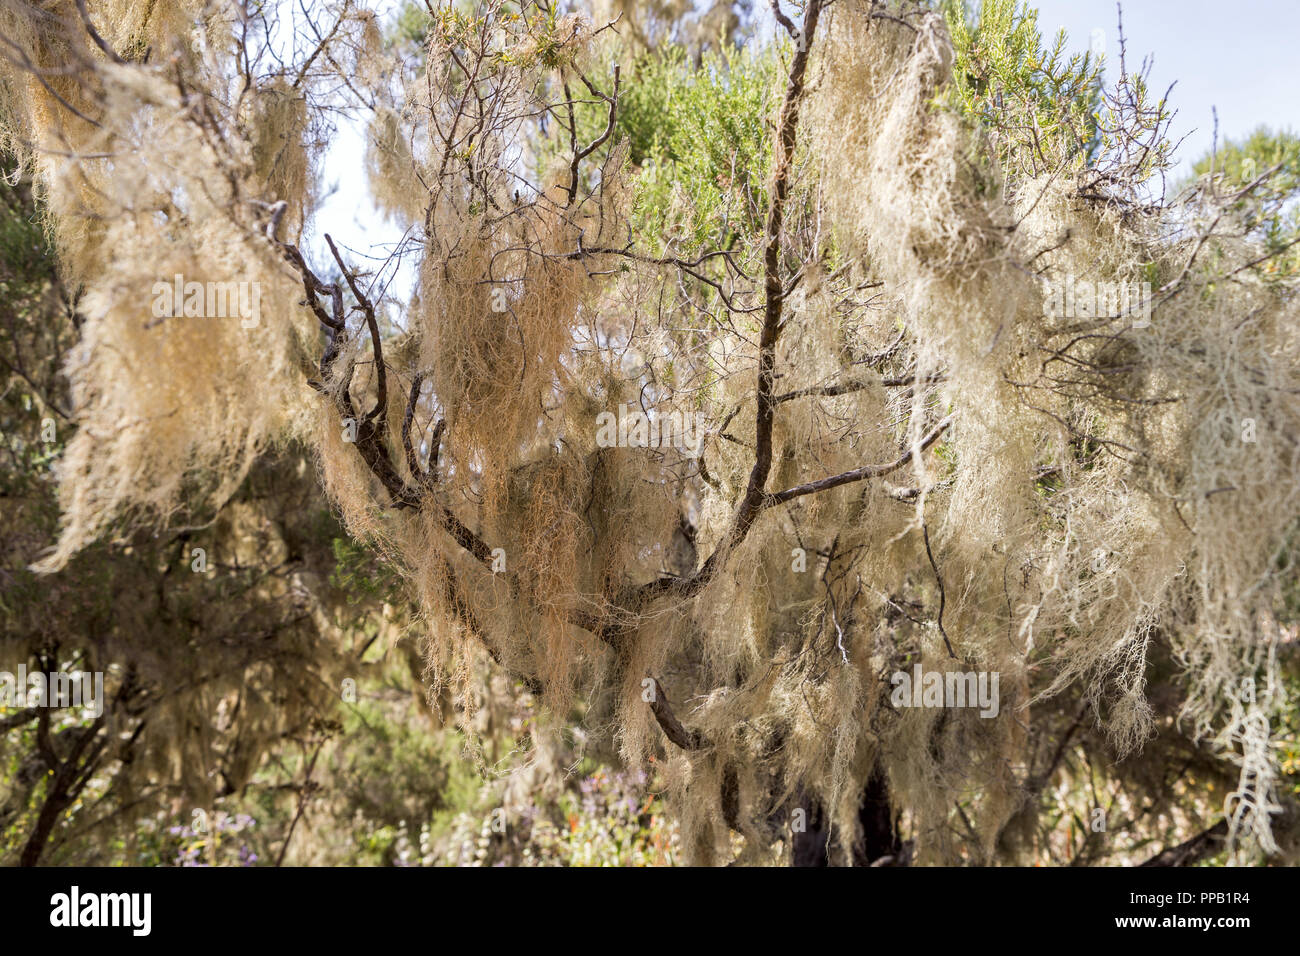 Lichen covered trees, Simiens National Park, Ethiopia Stock Photo